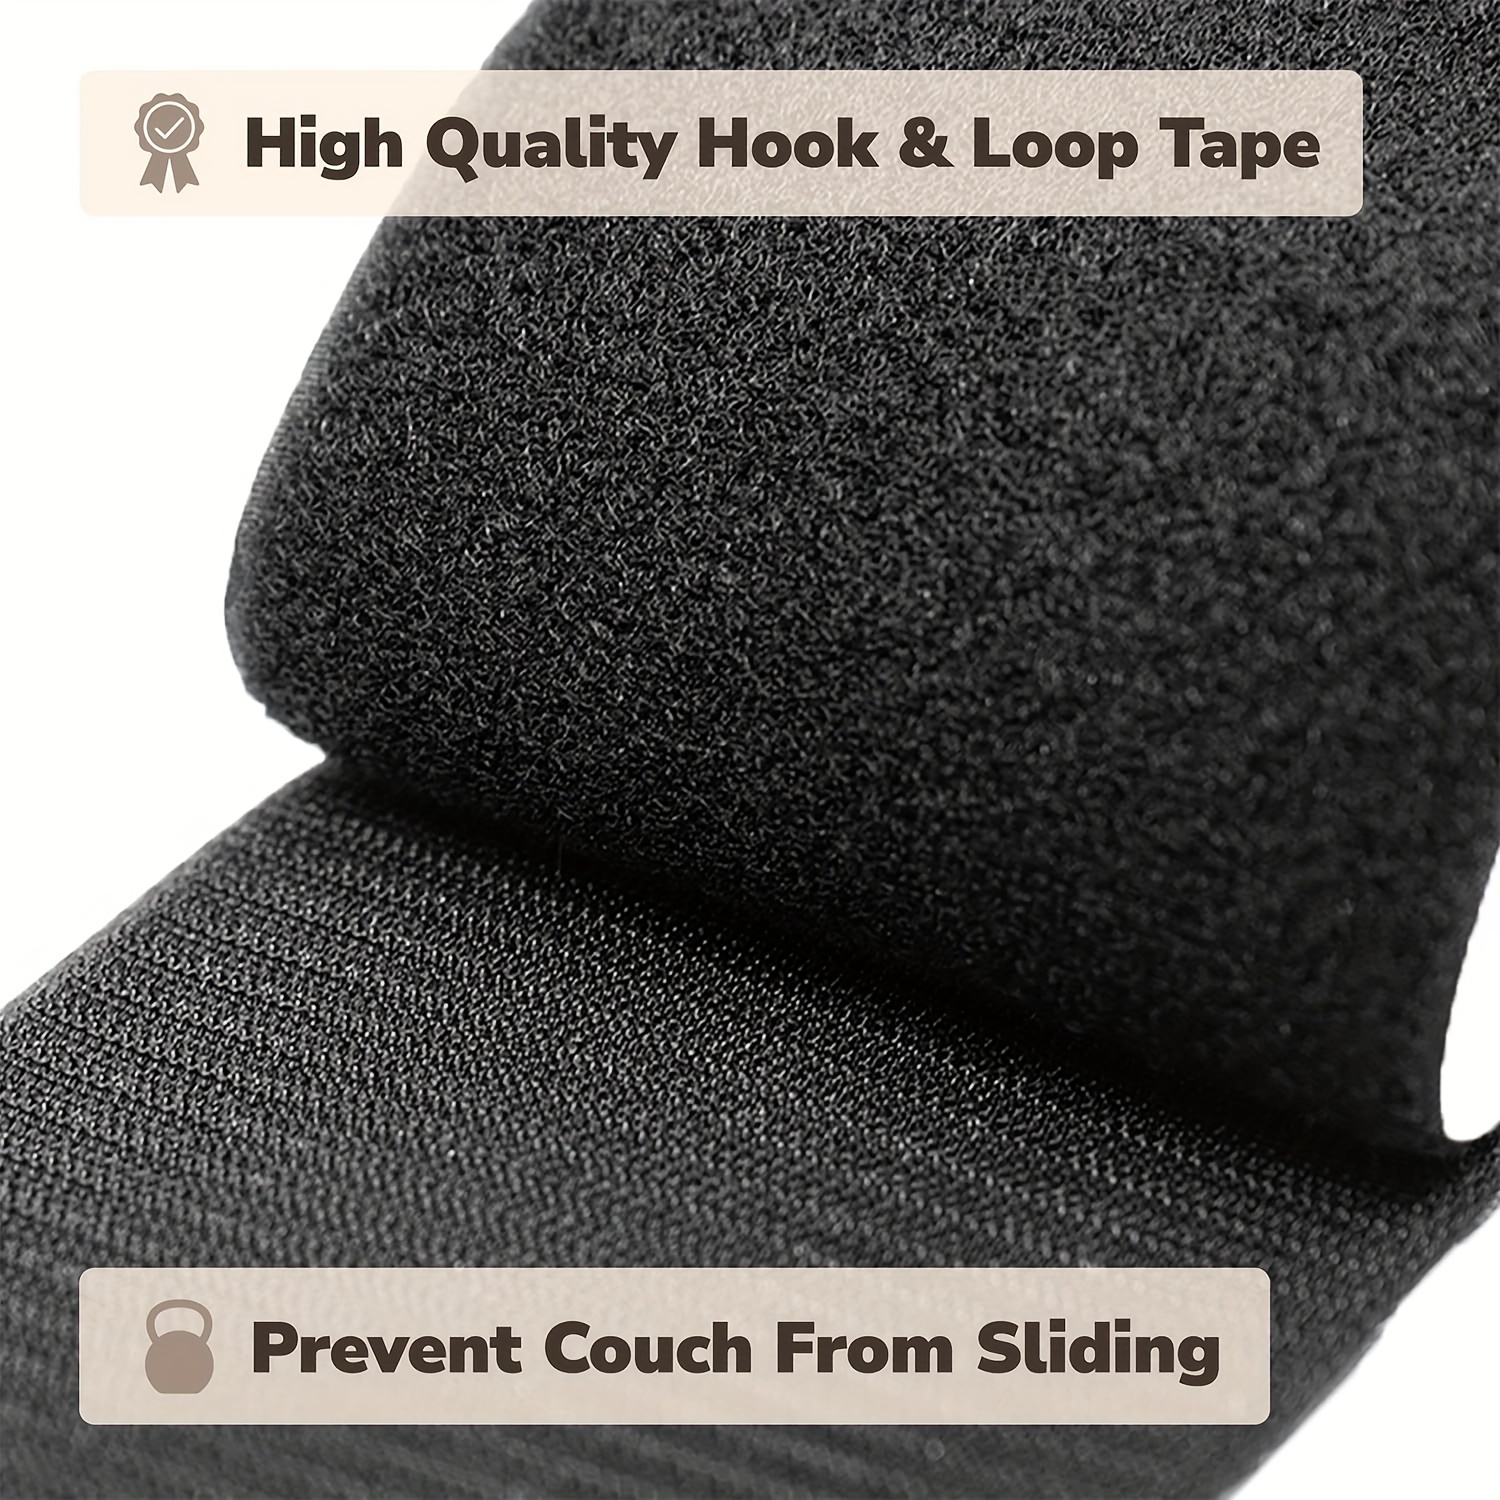 Nylon Hook and Loop Tape-Non Slip Couch Hook Loop Tape, Stop Sofa Cushions